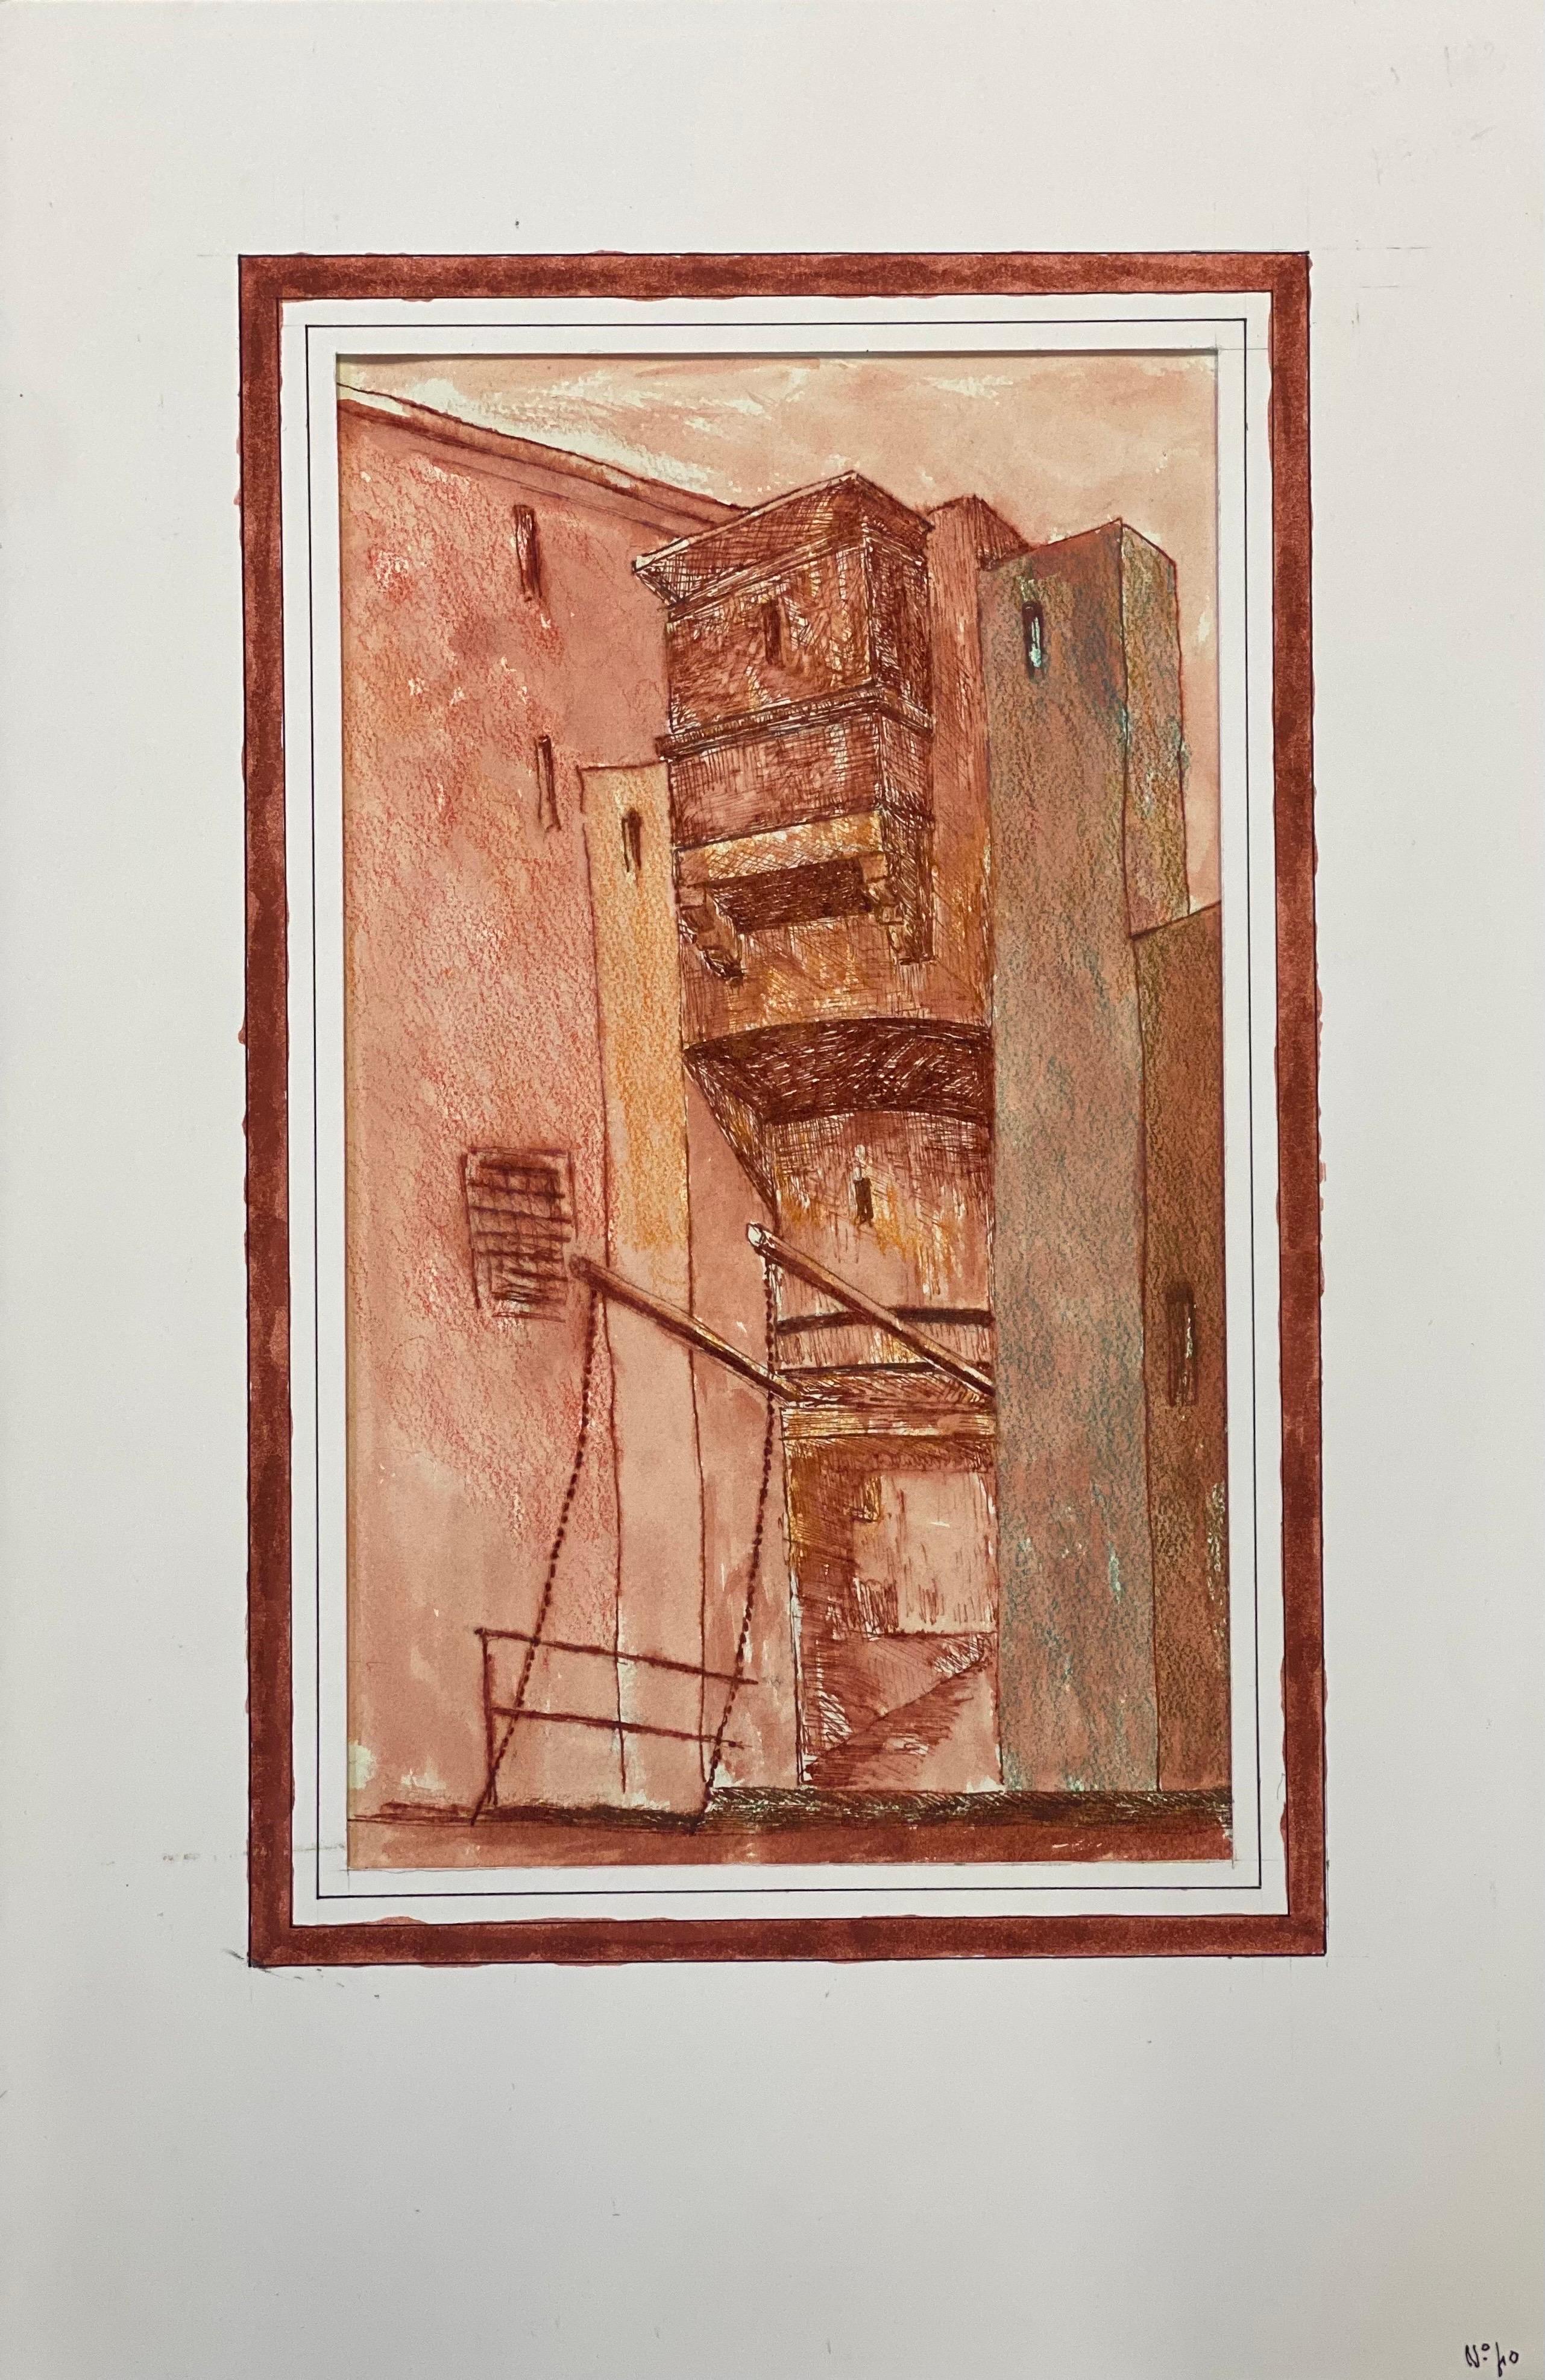 Red building
by Bernard Labbe (French mid 20th century), stamped verso
original watercolor/gouache painting on paper 
overall size: 16 x 10.5 inches
condition: very good and ready to be enjoyed. 

provenance: the artists atelier/ studio,